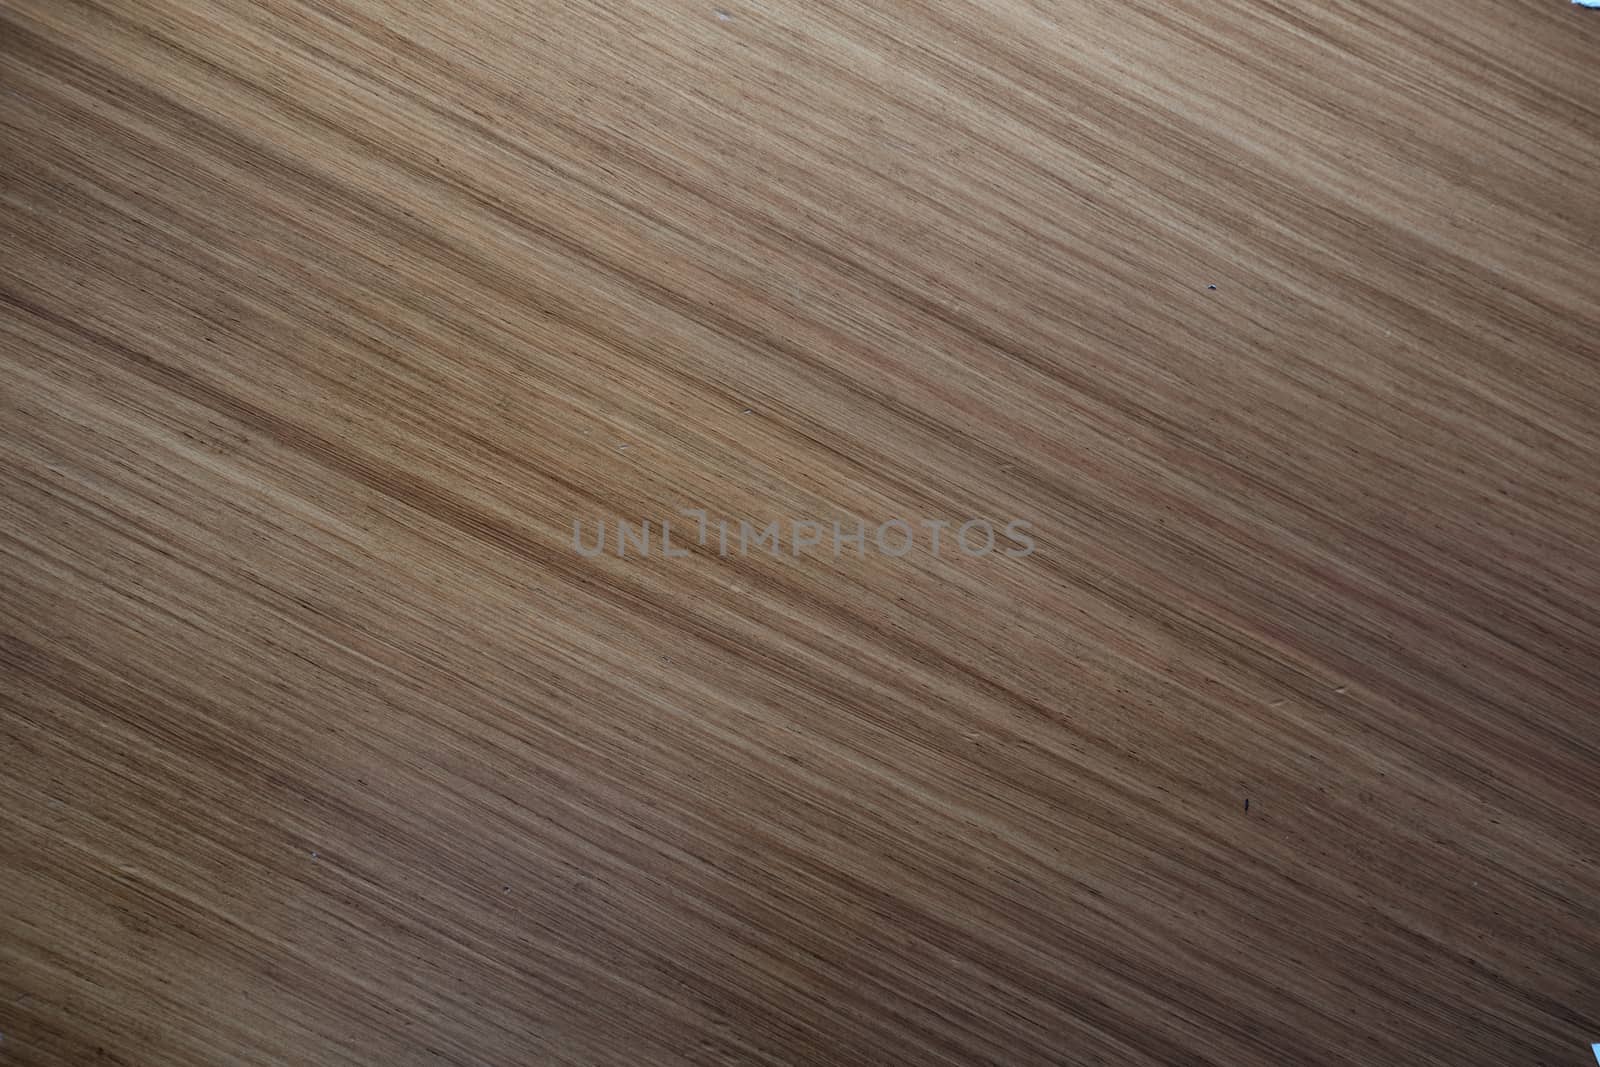 Simple wooden background with oblique streaks by mikelju